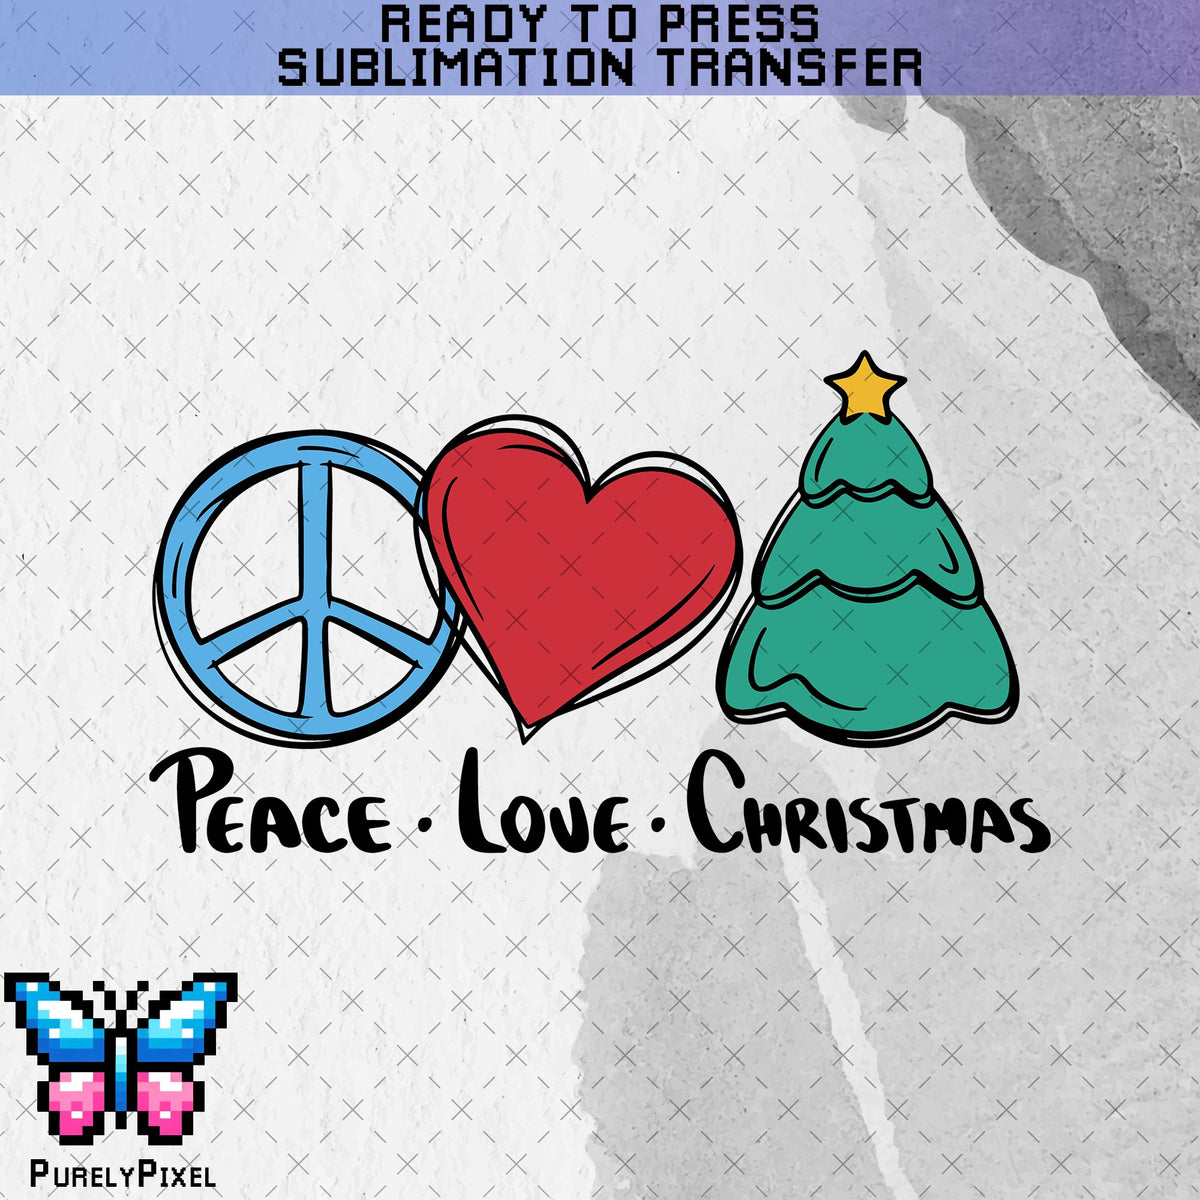 Peace Love Christmas Sub Transfer | Christmas Holidays with Christmas Tree Sub Transfer | Ready to Press Sublimation Transfer | PurelyPixels | Sublimation Transfers